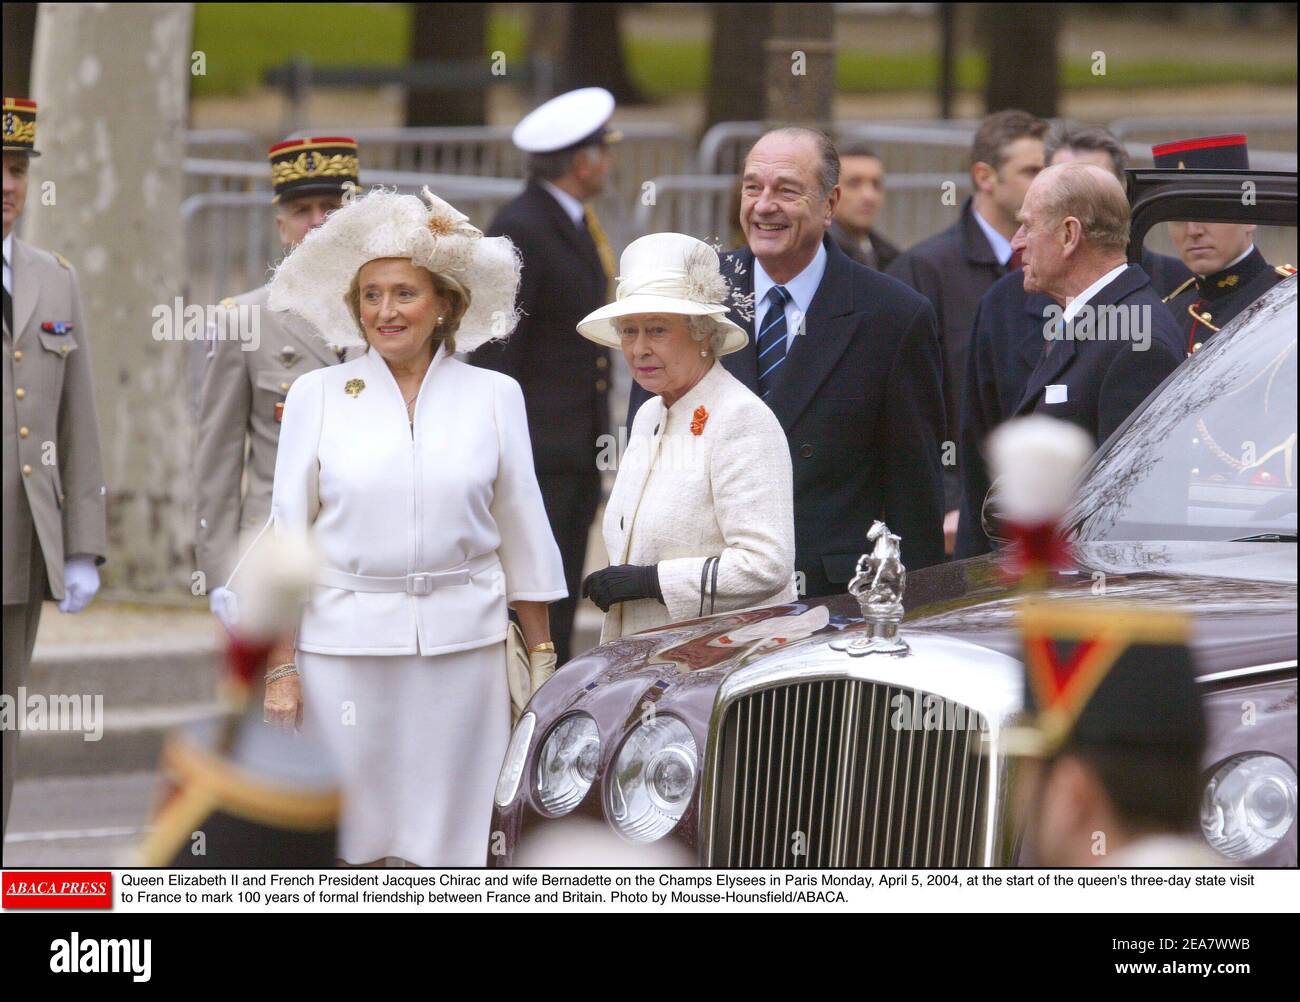 Britian's Queen Elizabeth II and French President Jacques Chirac and his wife Bernadette on the Champs Elysees in Paris Monday, April 5, 2004, at the start of the queen's three-day state visit to France to mark 100 years of formal friendship between France and Britain. Photo by Mousse-Hounsfield/ABACA. Stock Photo